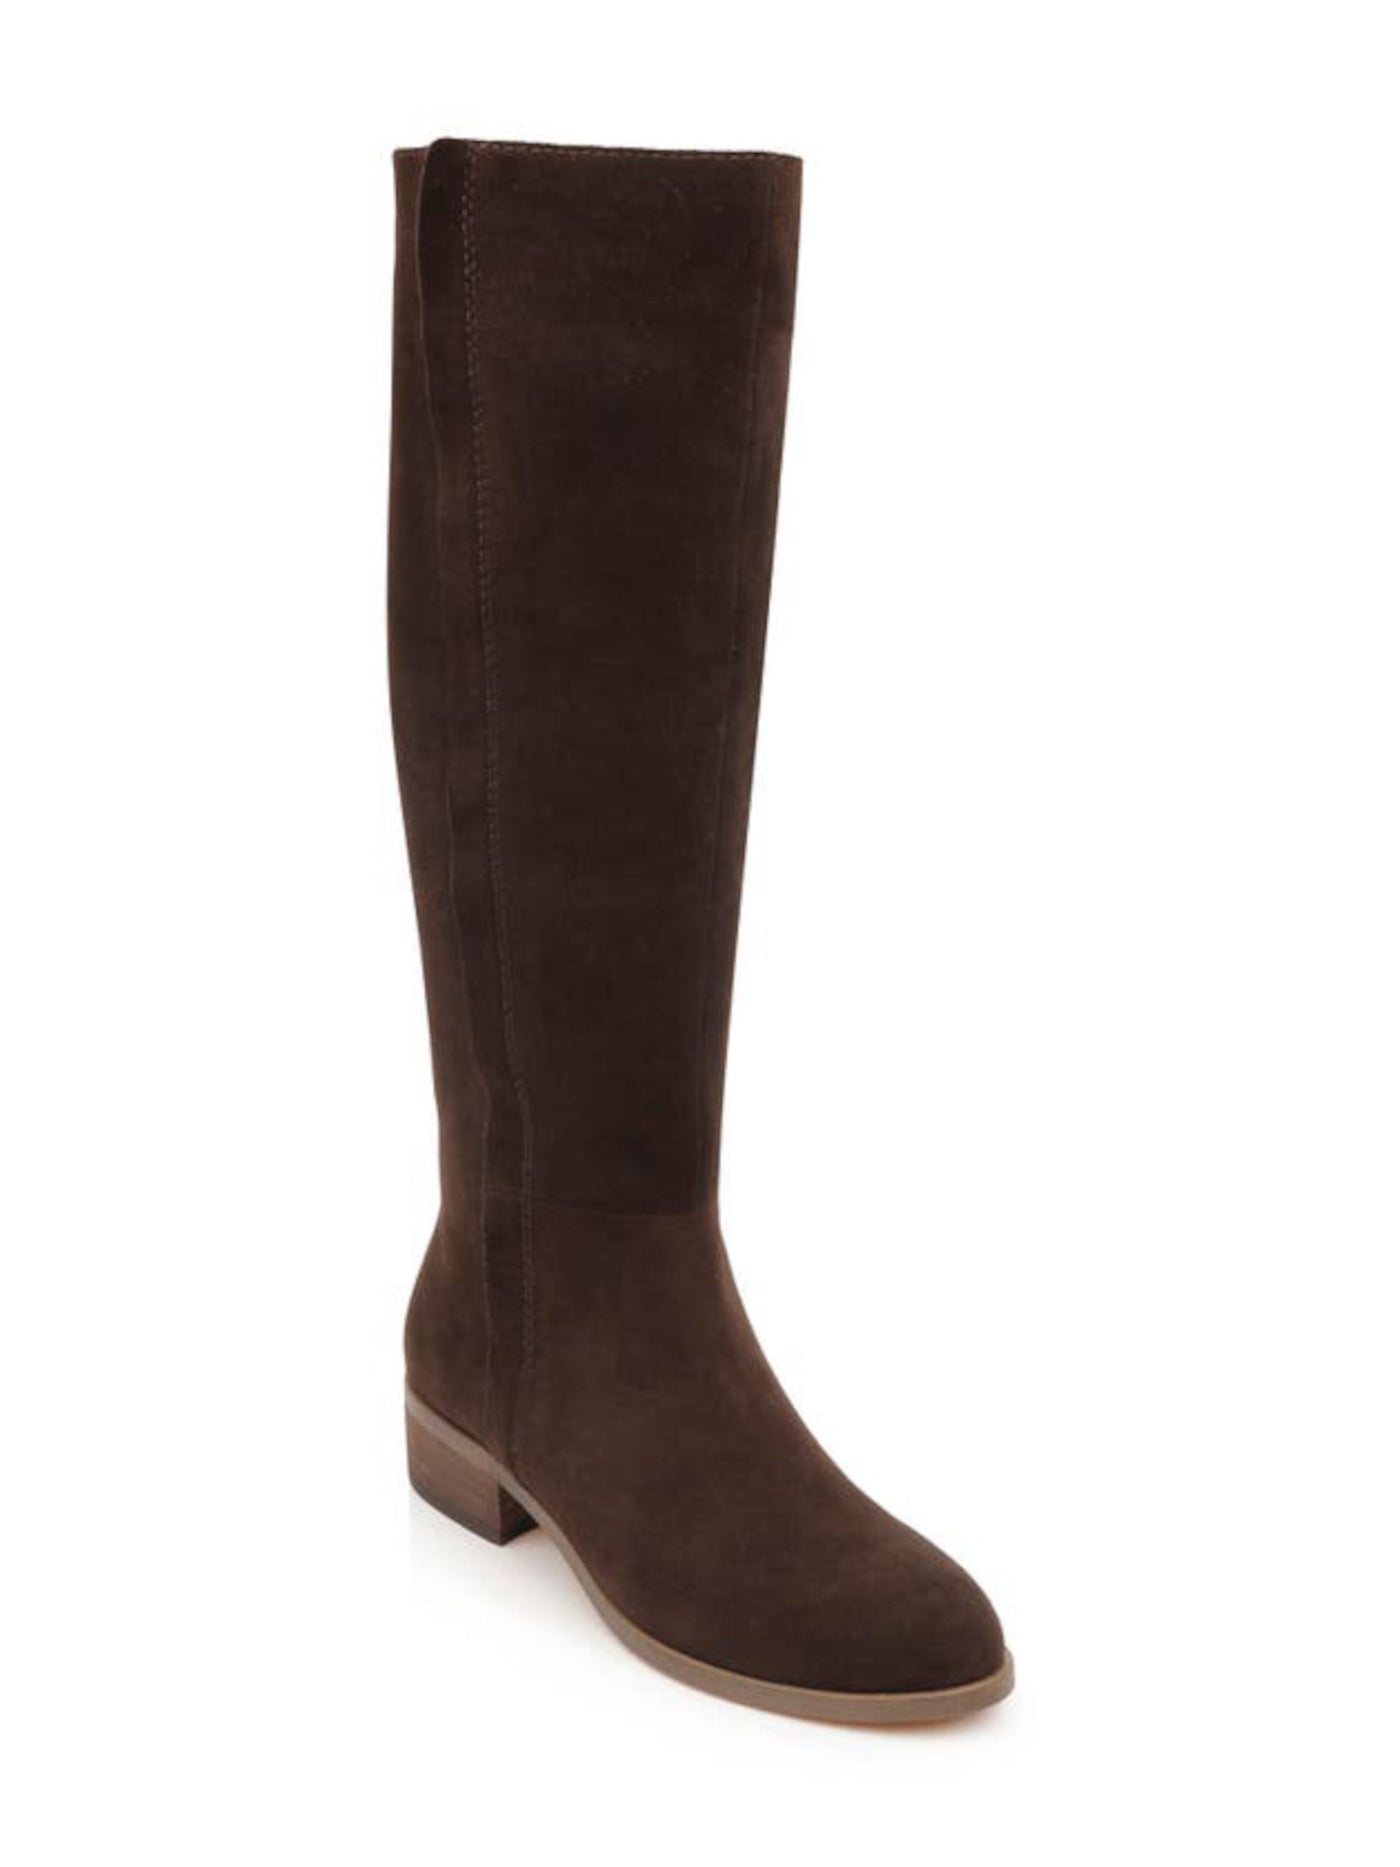 SPLENDID Womens Brown Padded Keaton Round Toe Stacked Heel Zip-Up Leather Riding Boot 11